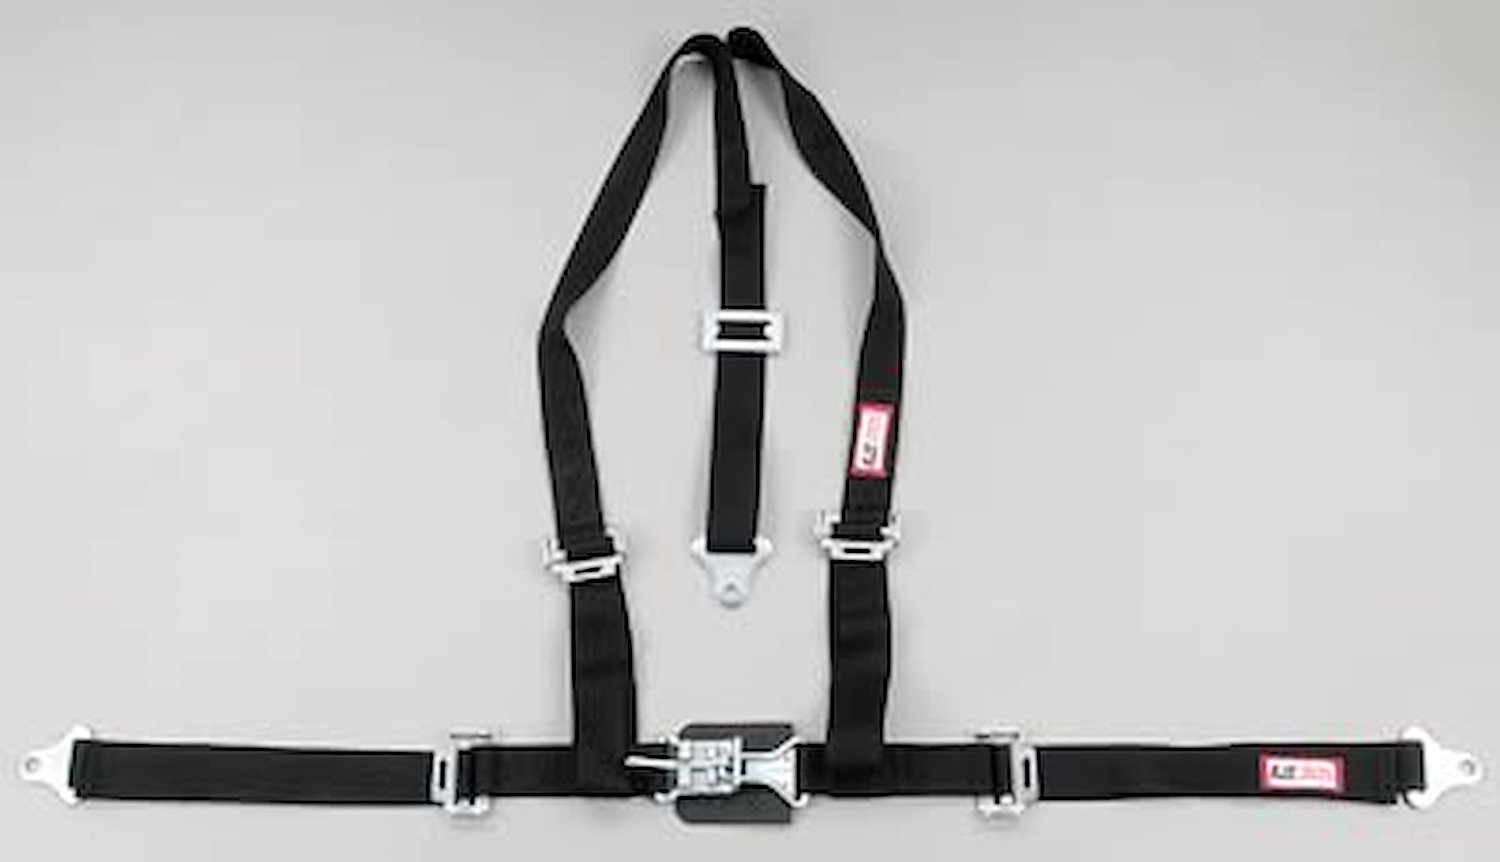 NON-SFI L&L HARNESS 2 PULL UP Lap Belt SNAP SEWN IN 2 S.H. Y FLOOR Mount w/STERNUM STRAP WRAP/SNAP BLACK